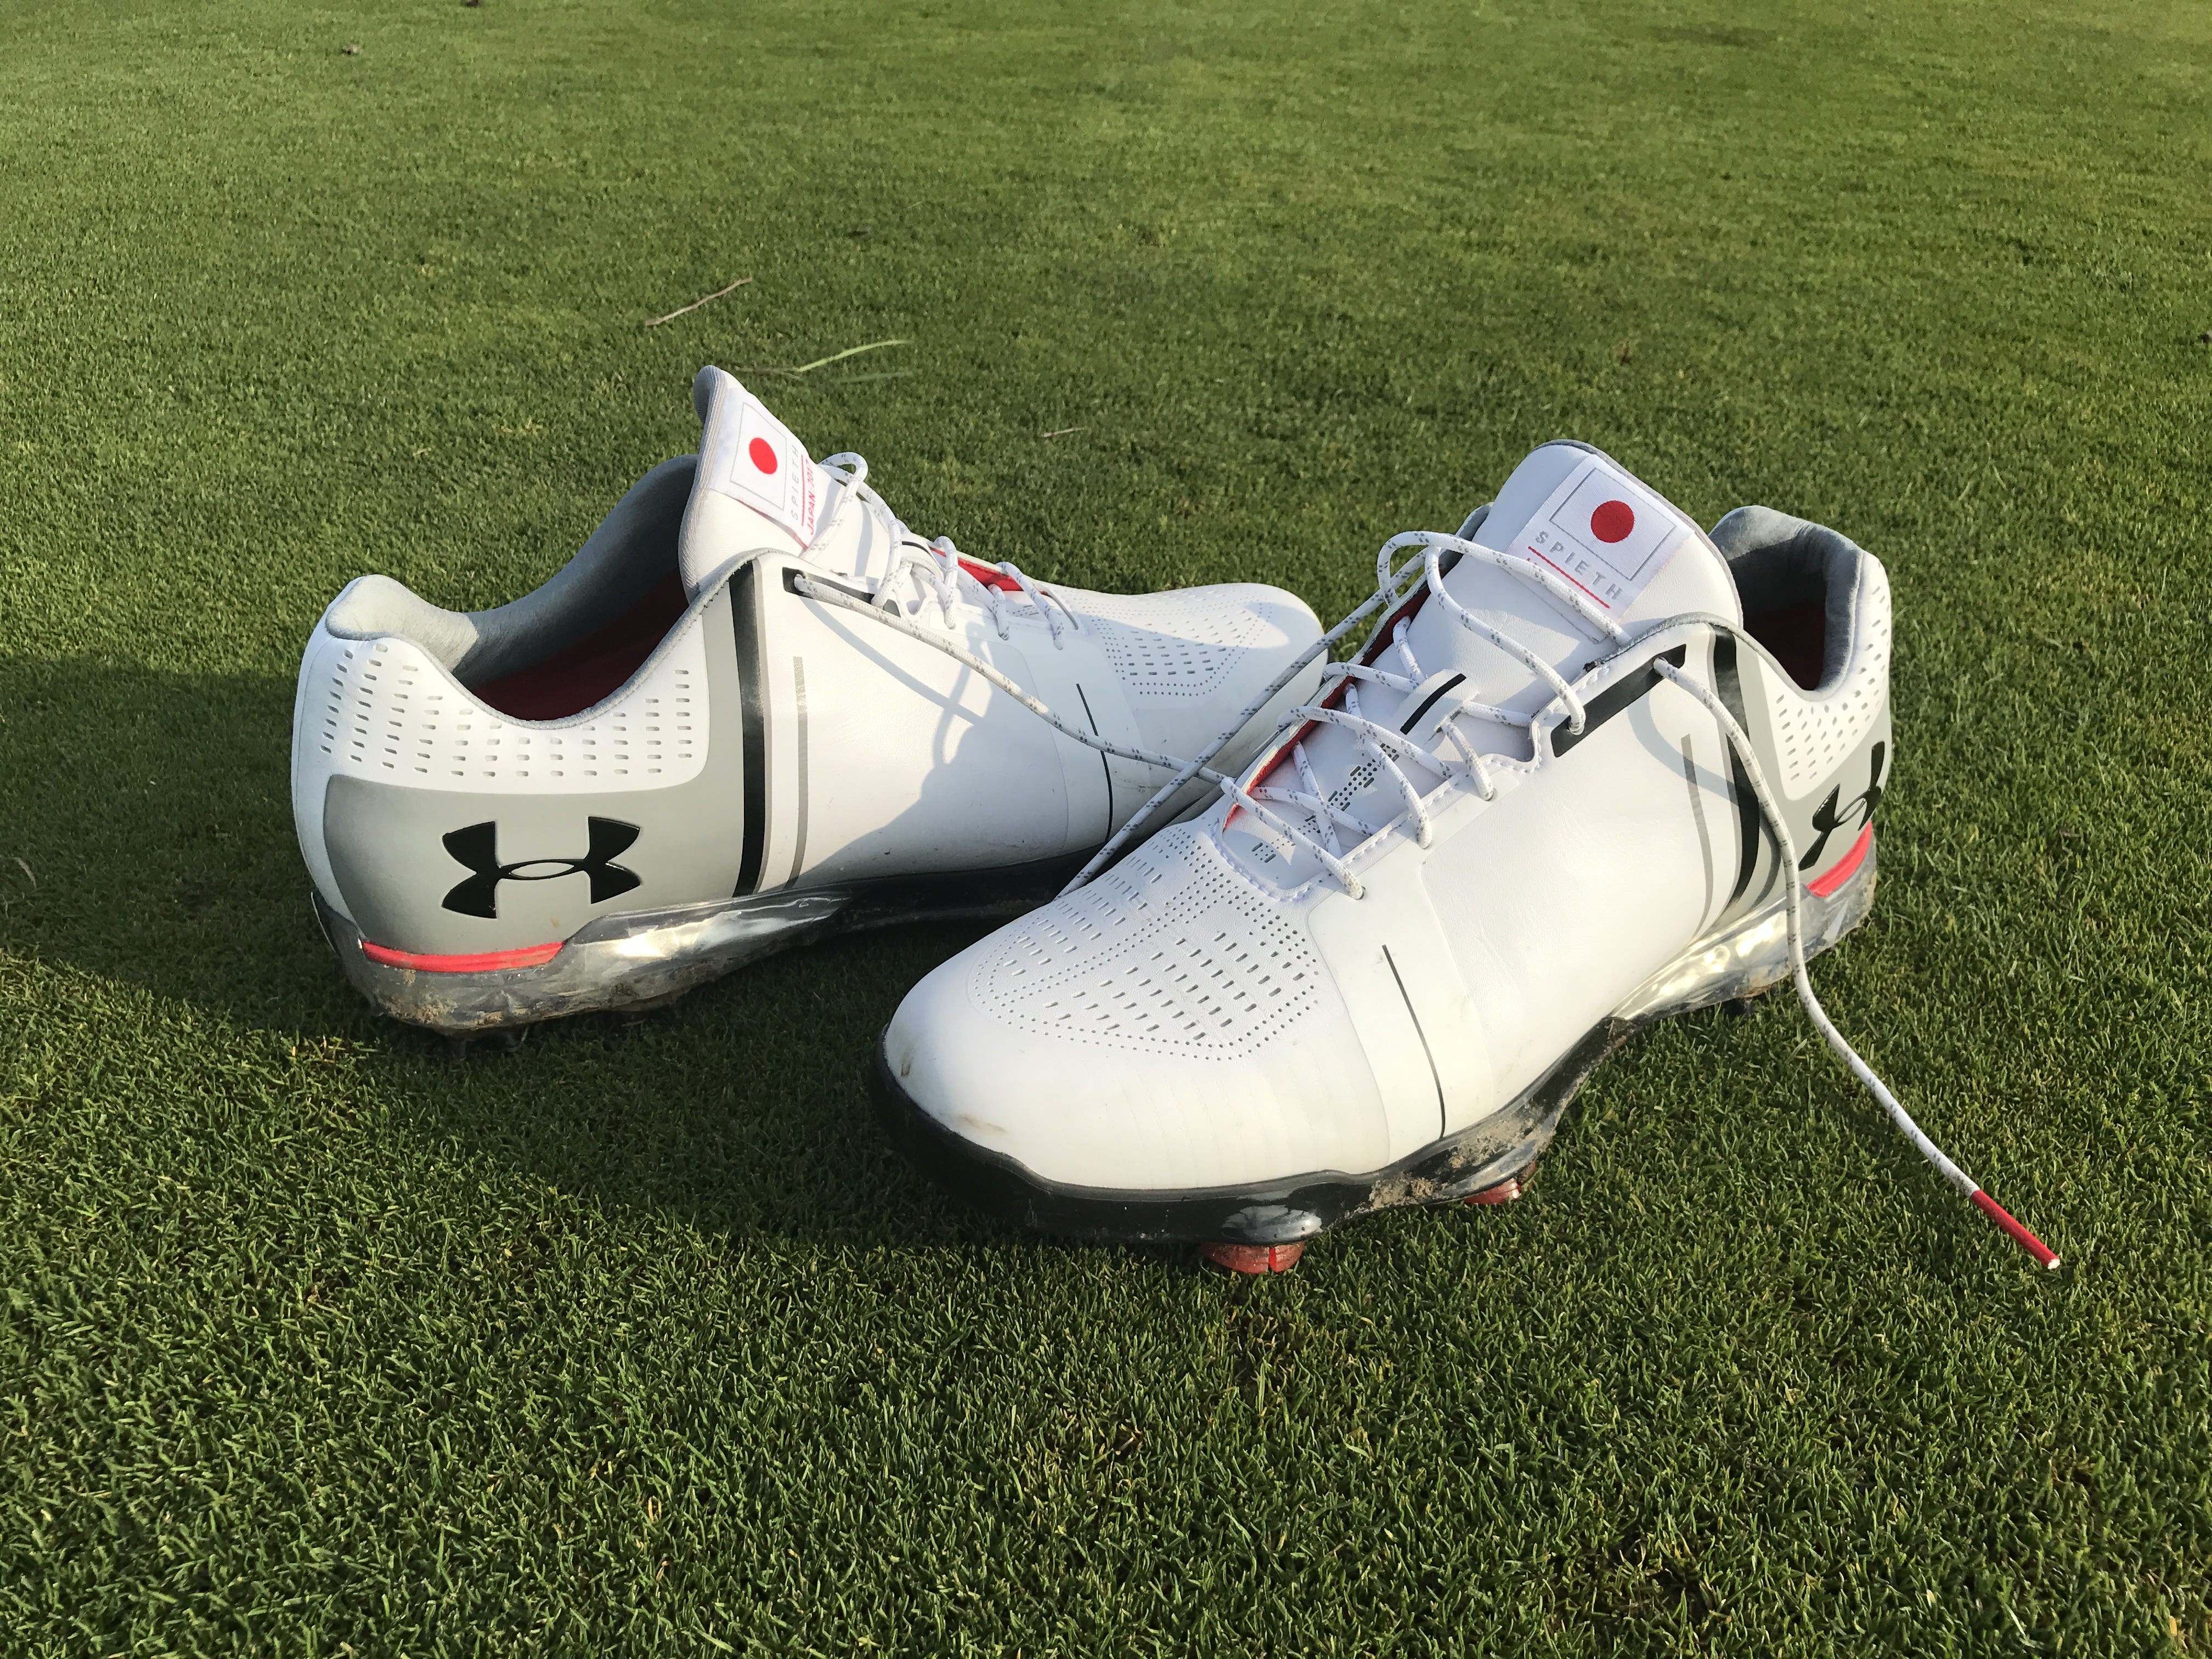 Under Armour golf shoes 2017